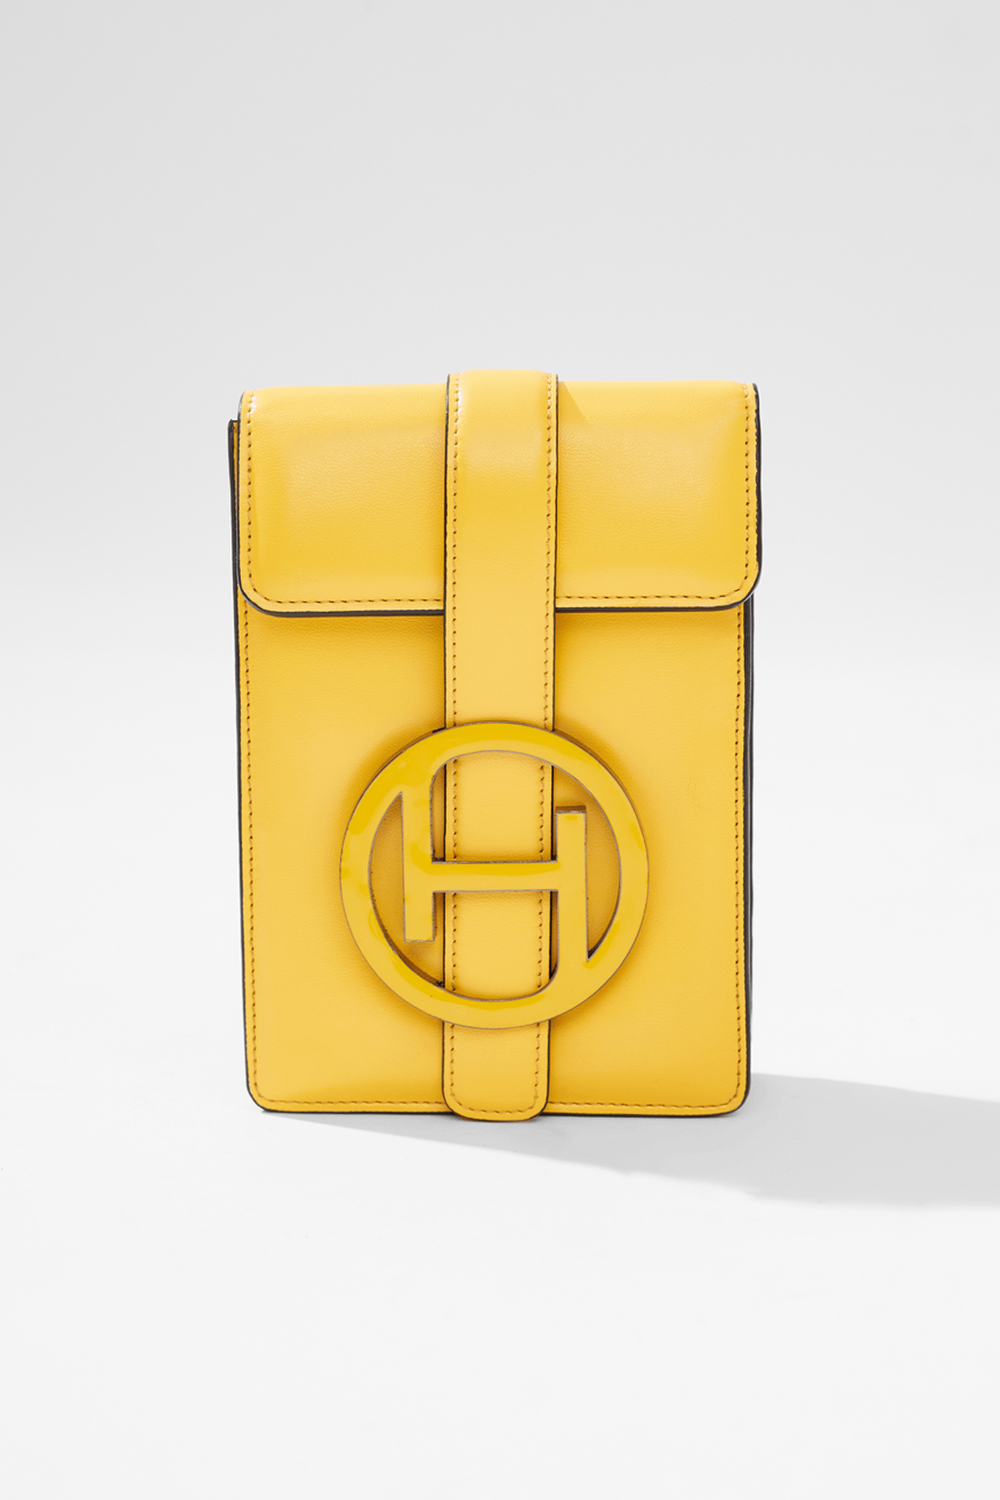 The Dopamine Messenger Bag In Tuscany Yellow